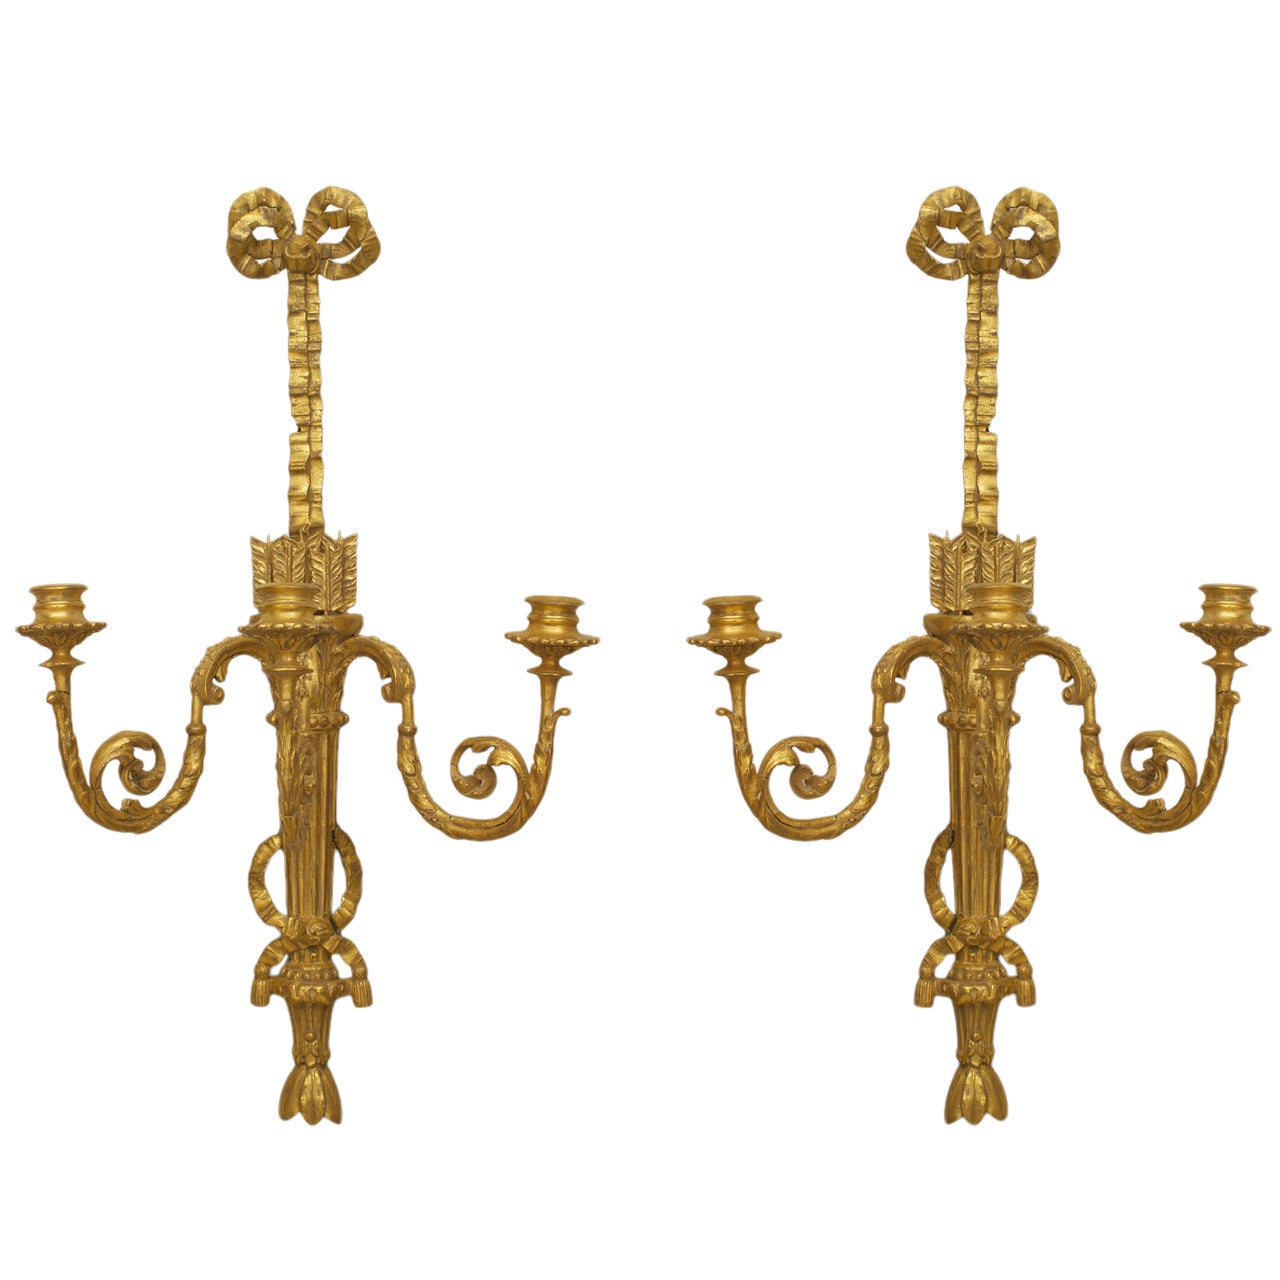 Pair of French Louis XVI Gilt Wooden Wall Sconces